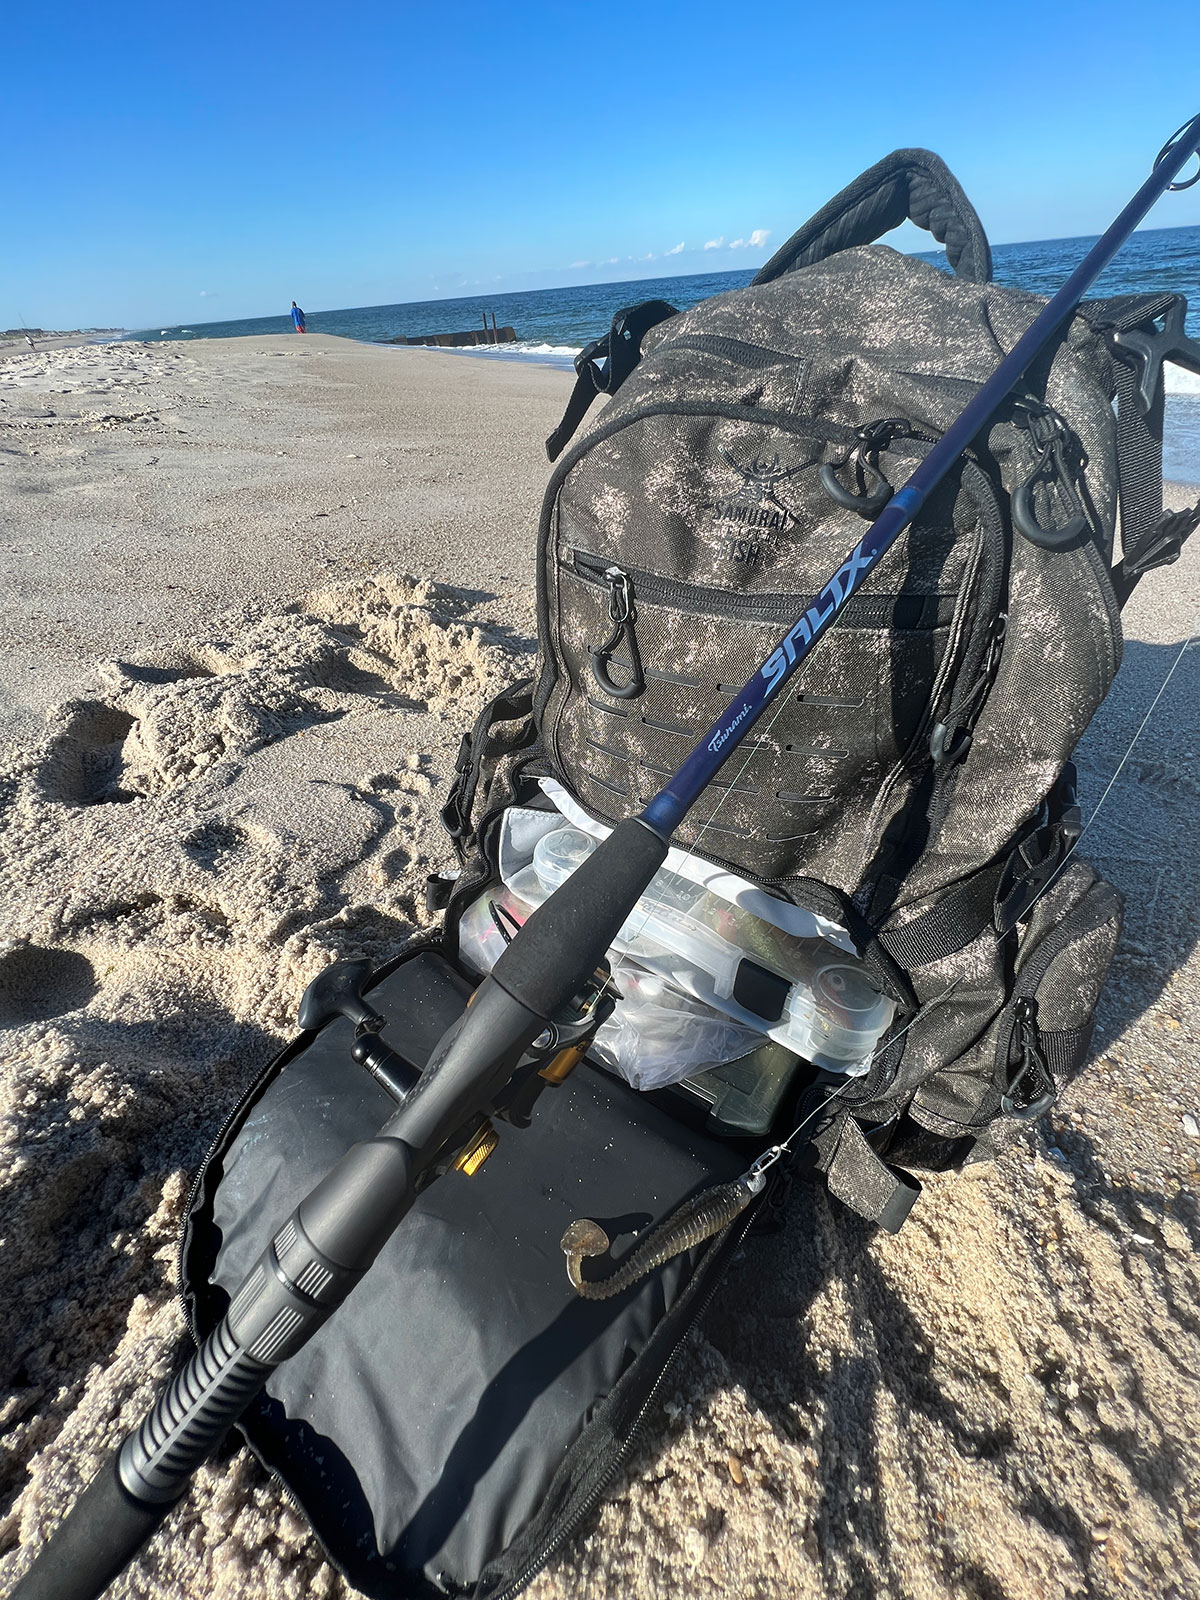 Product Review: Tsunami SaltX II Surf Rods - The Fisherman